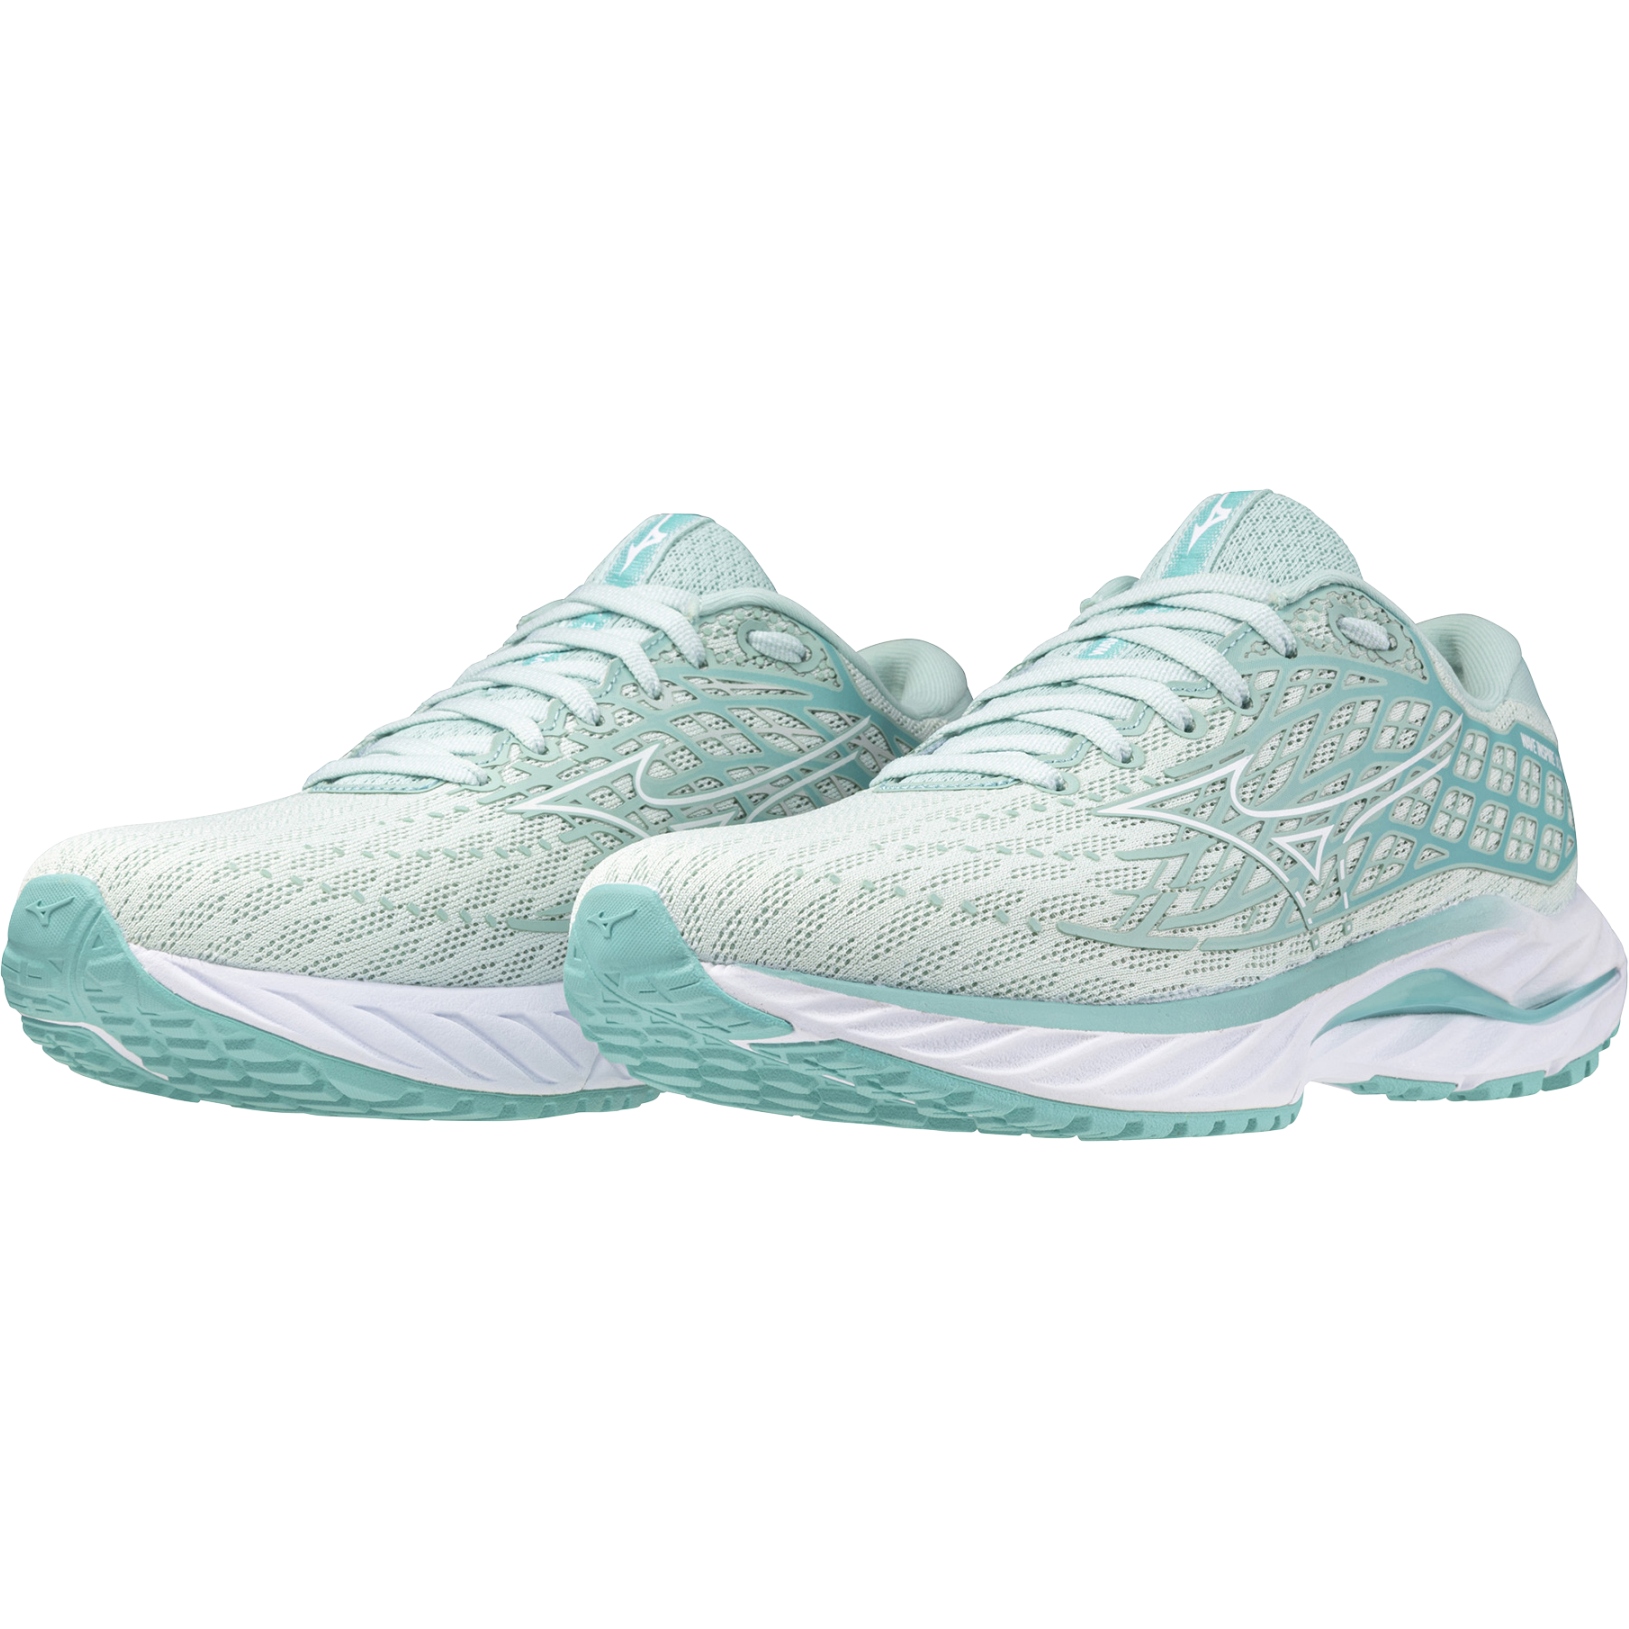 Picture of Mizuno Wave Inspire 20 Running Shoes Women - Eggshell Blue / White / Blue Turquoise